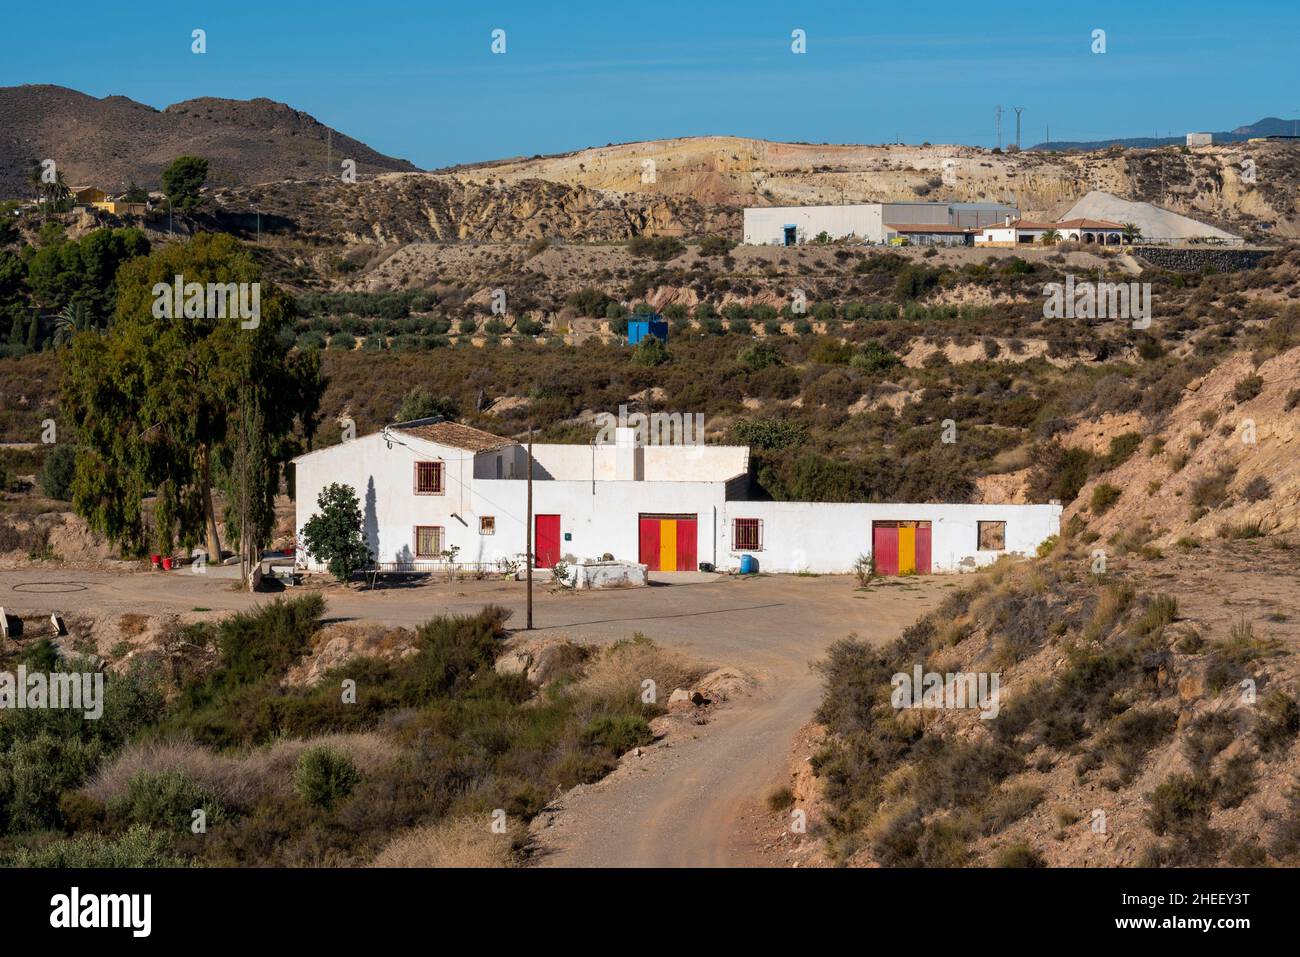 Hillside and valley properties outside Albox, Almeria, Andalusia, Spain. Rural, countryside farmhouse cortijo homes. Spanish colours on doors Stock Photo